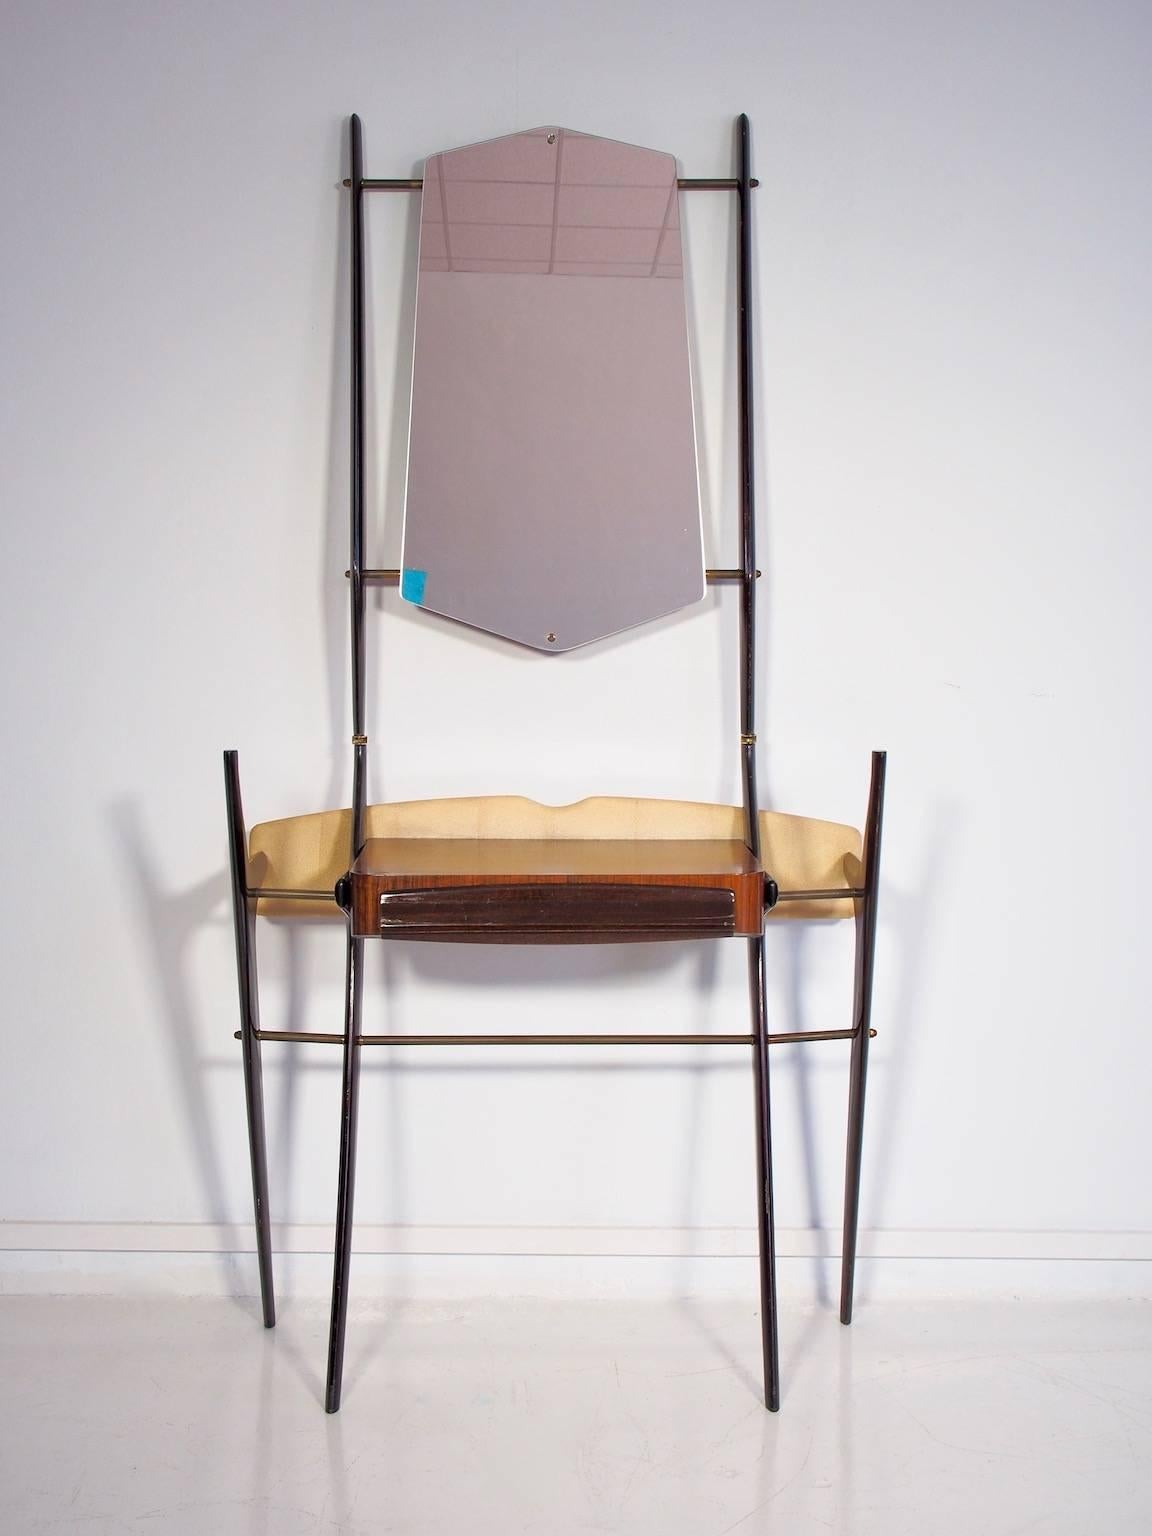 Incredible scissor shaped console with glass shelf and wooden drawer compartment. Lacquered rosewood with brass clips. Back platform upholstered in faux fabric with board screws to attach the piece to the wall if desired.